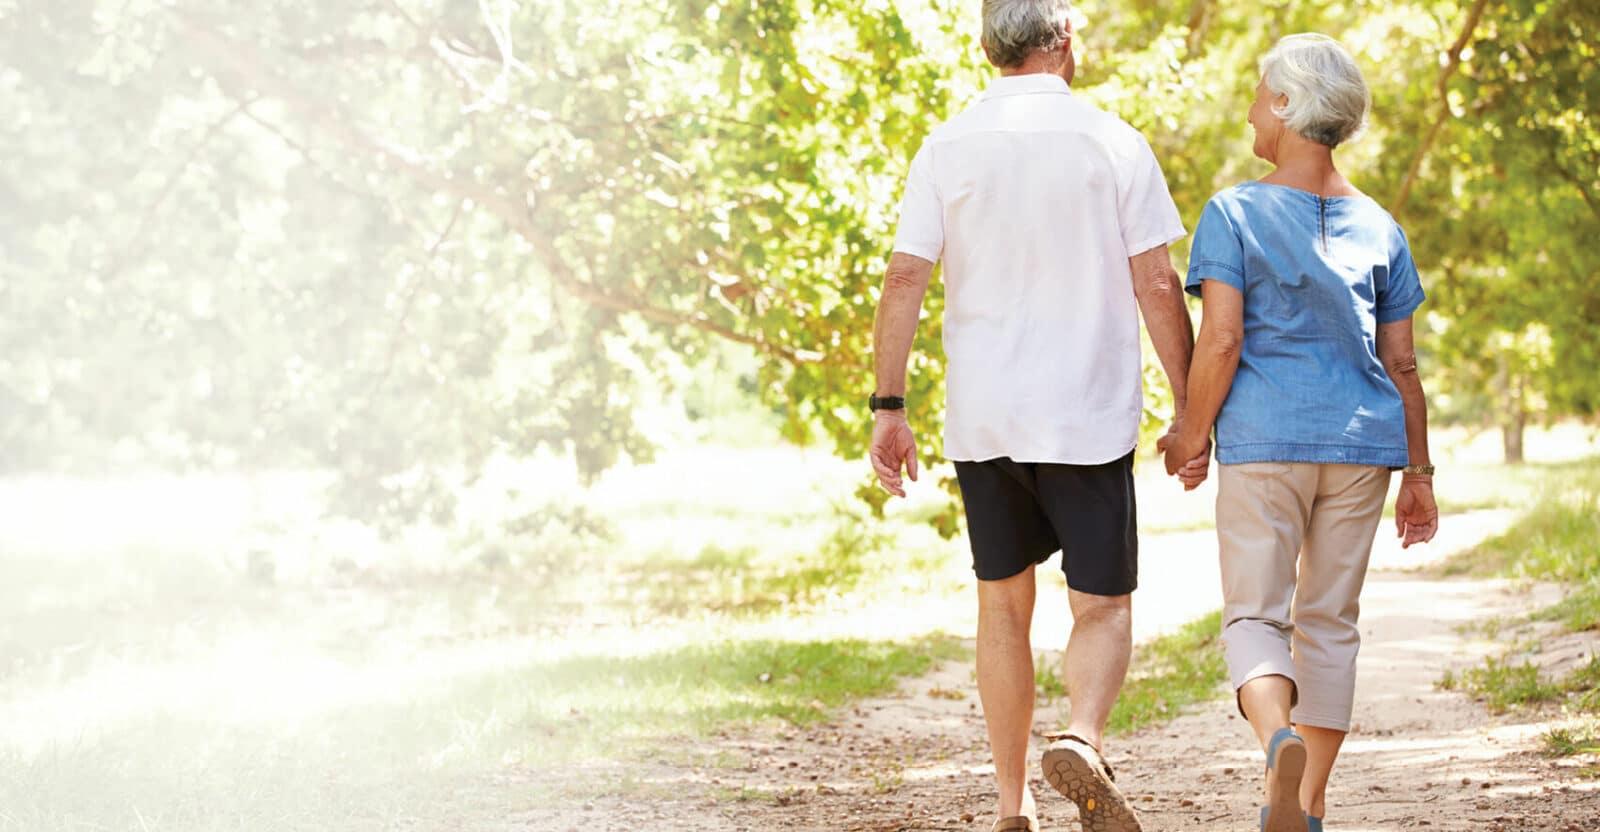 man in a white shirt and black shorts holding hands and walking with senior woman on a nature path